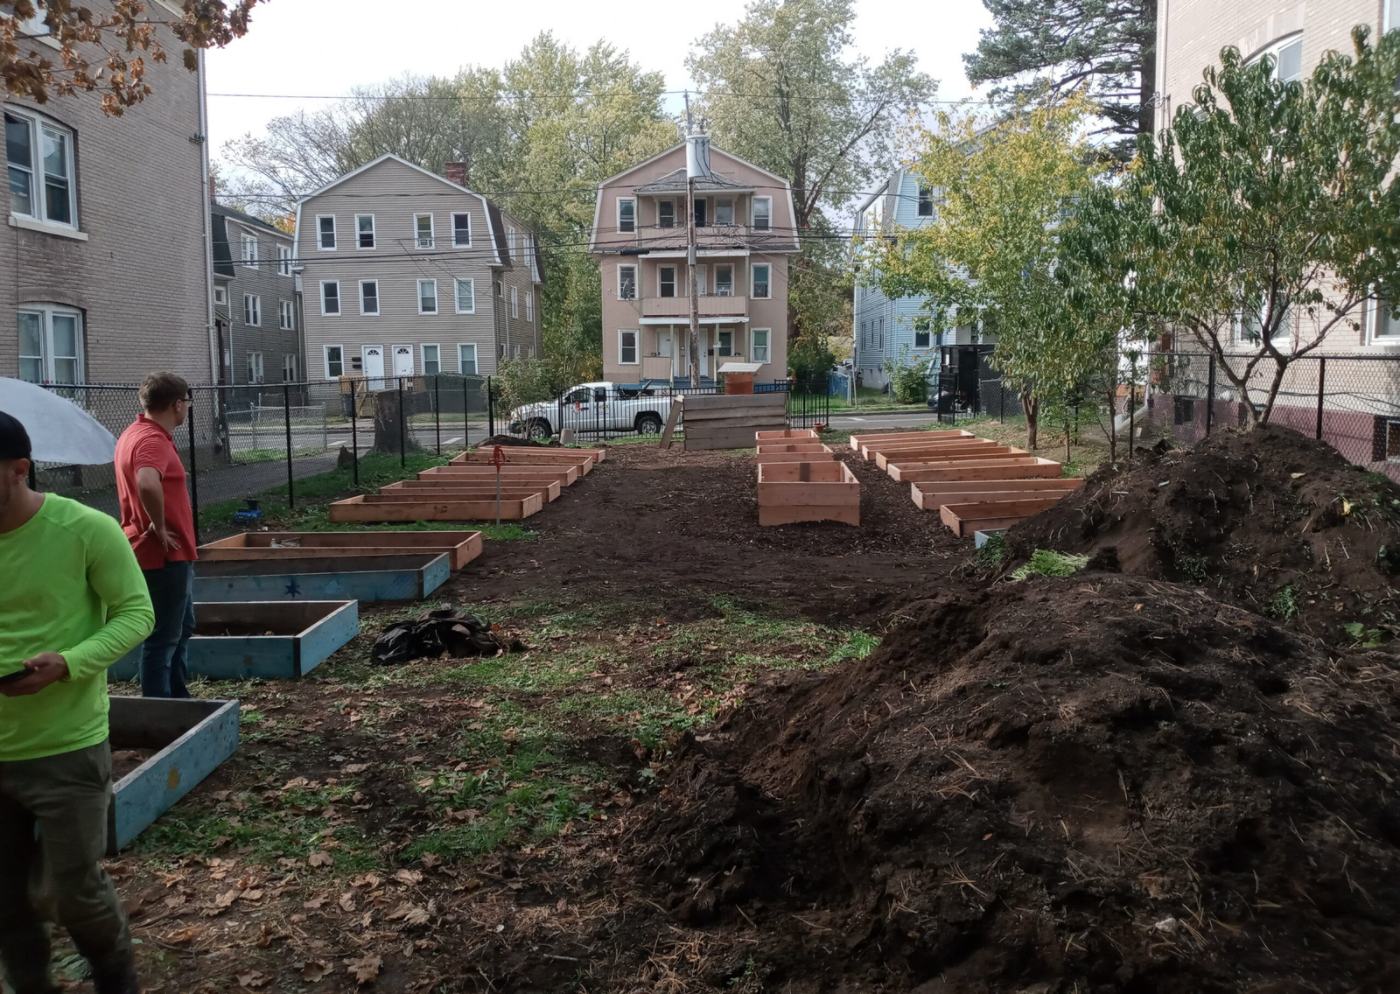 Community garden with 2 gardeners standing on the left, a mound of dirt on the right, and empty raised garden beds in 3 rows